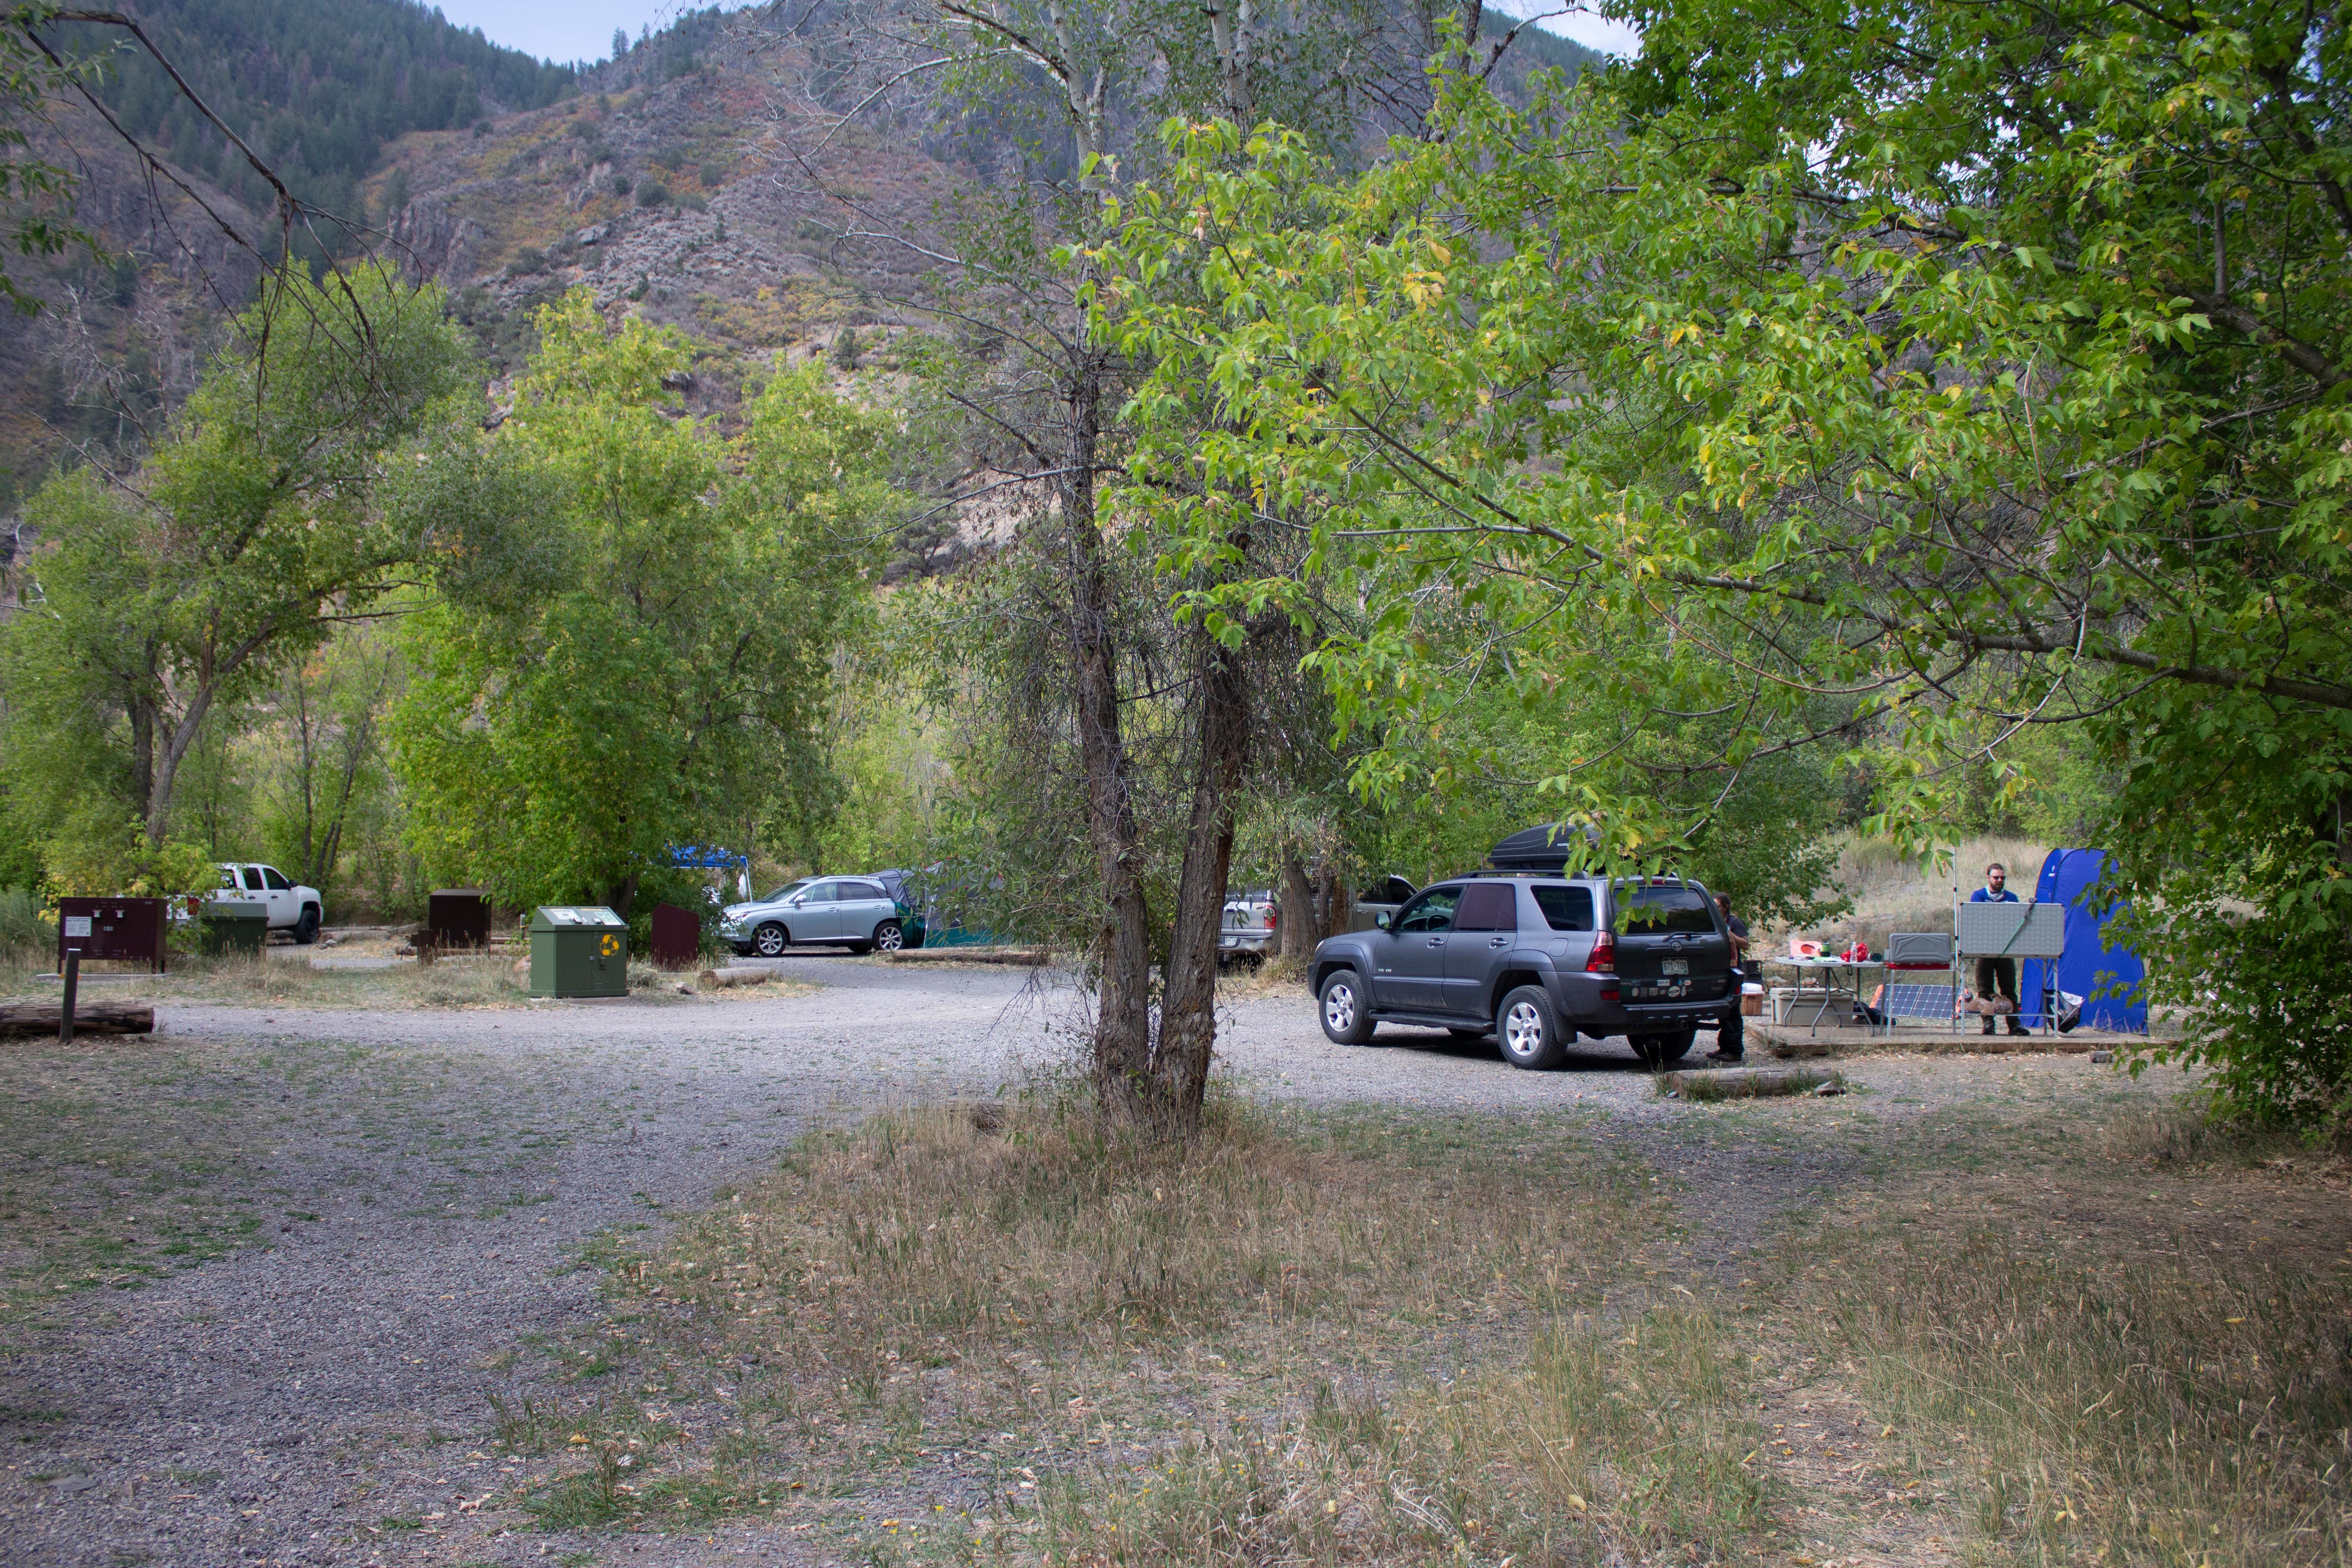 East Portal Campground  - Sites with vehicle access